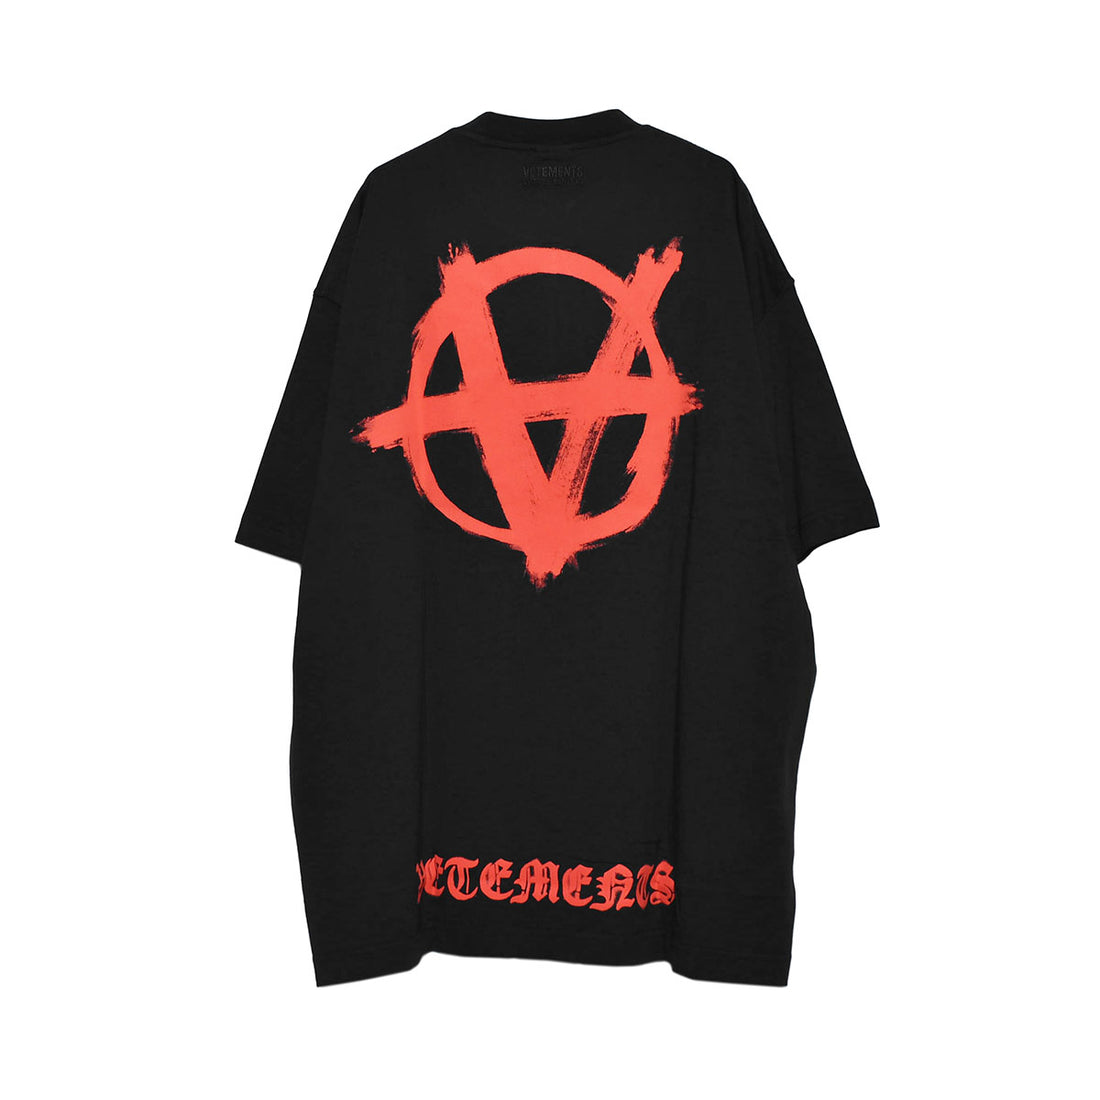 [VETEMENTS]DOUBLE ANARCHY T-SHIRT/BLACK/RED(UE64TR990)